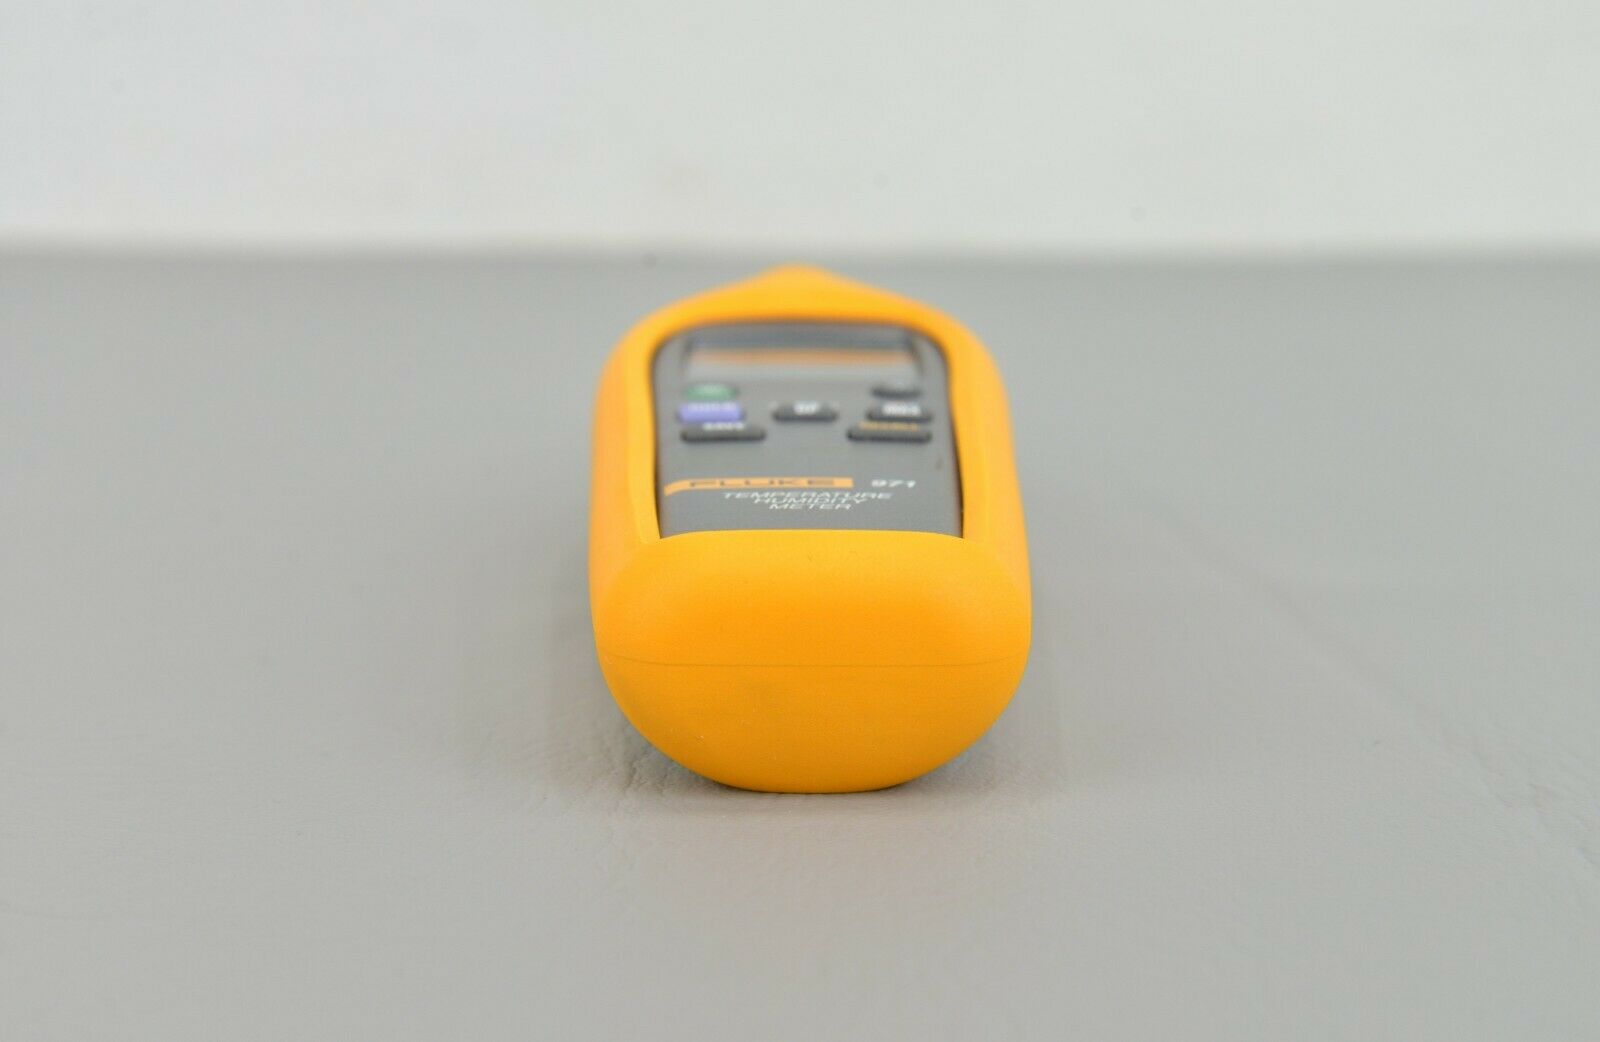 https://www.rhinotradellc.com/wp-content/uploads/imported/3/Fluke-971-Temperature-Humidity-Meter-w-Protective-Cover-24688-184583238733-4.JPG